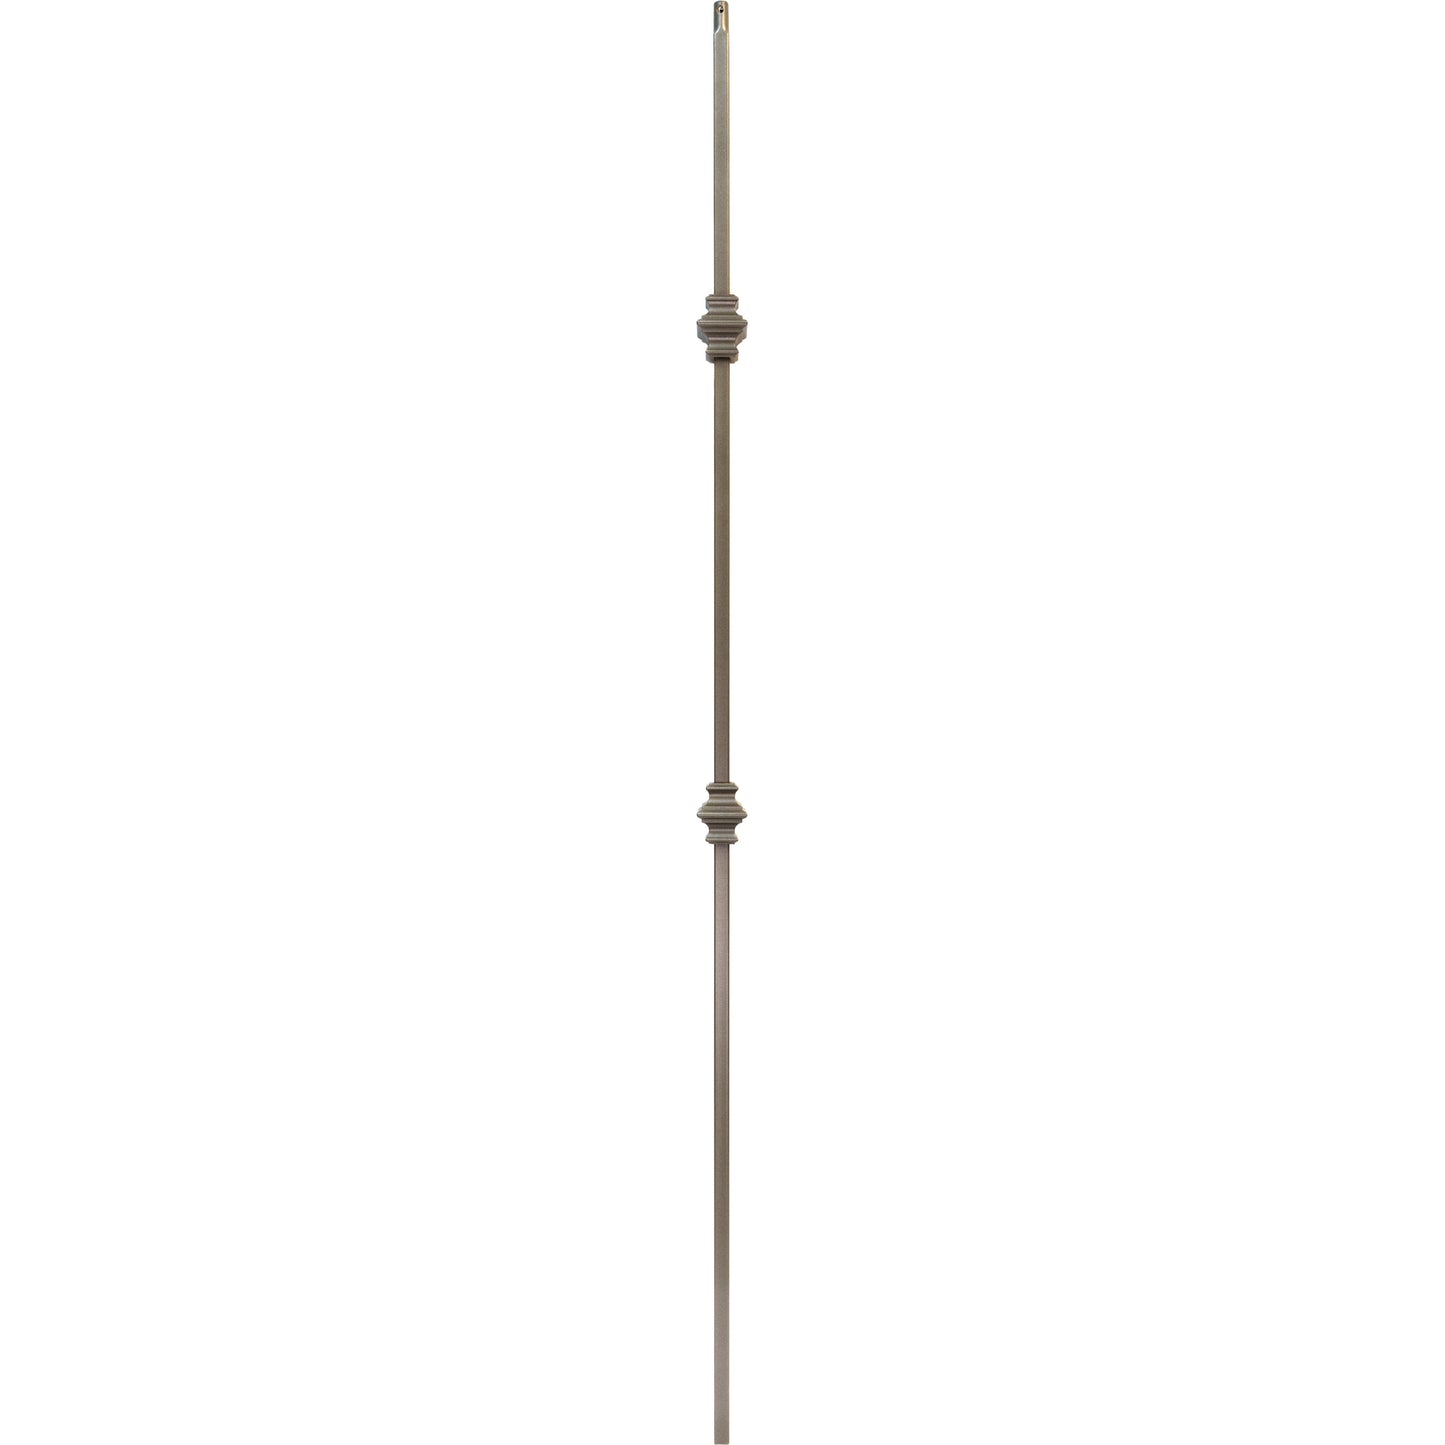 T61 - Iron Baluster - Square - Double Knuckle - 1/2"